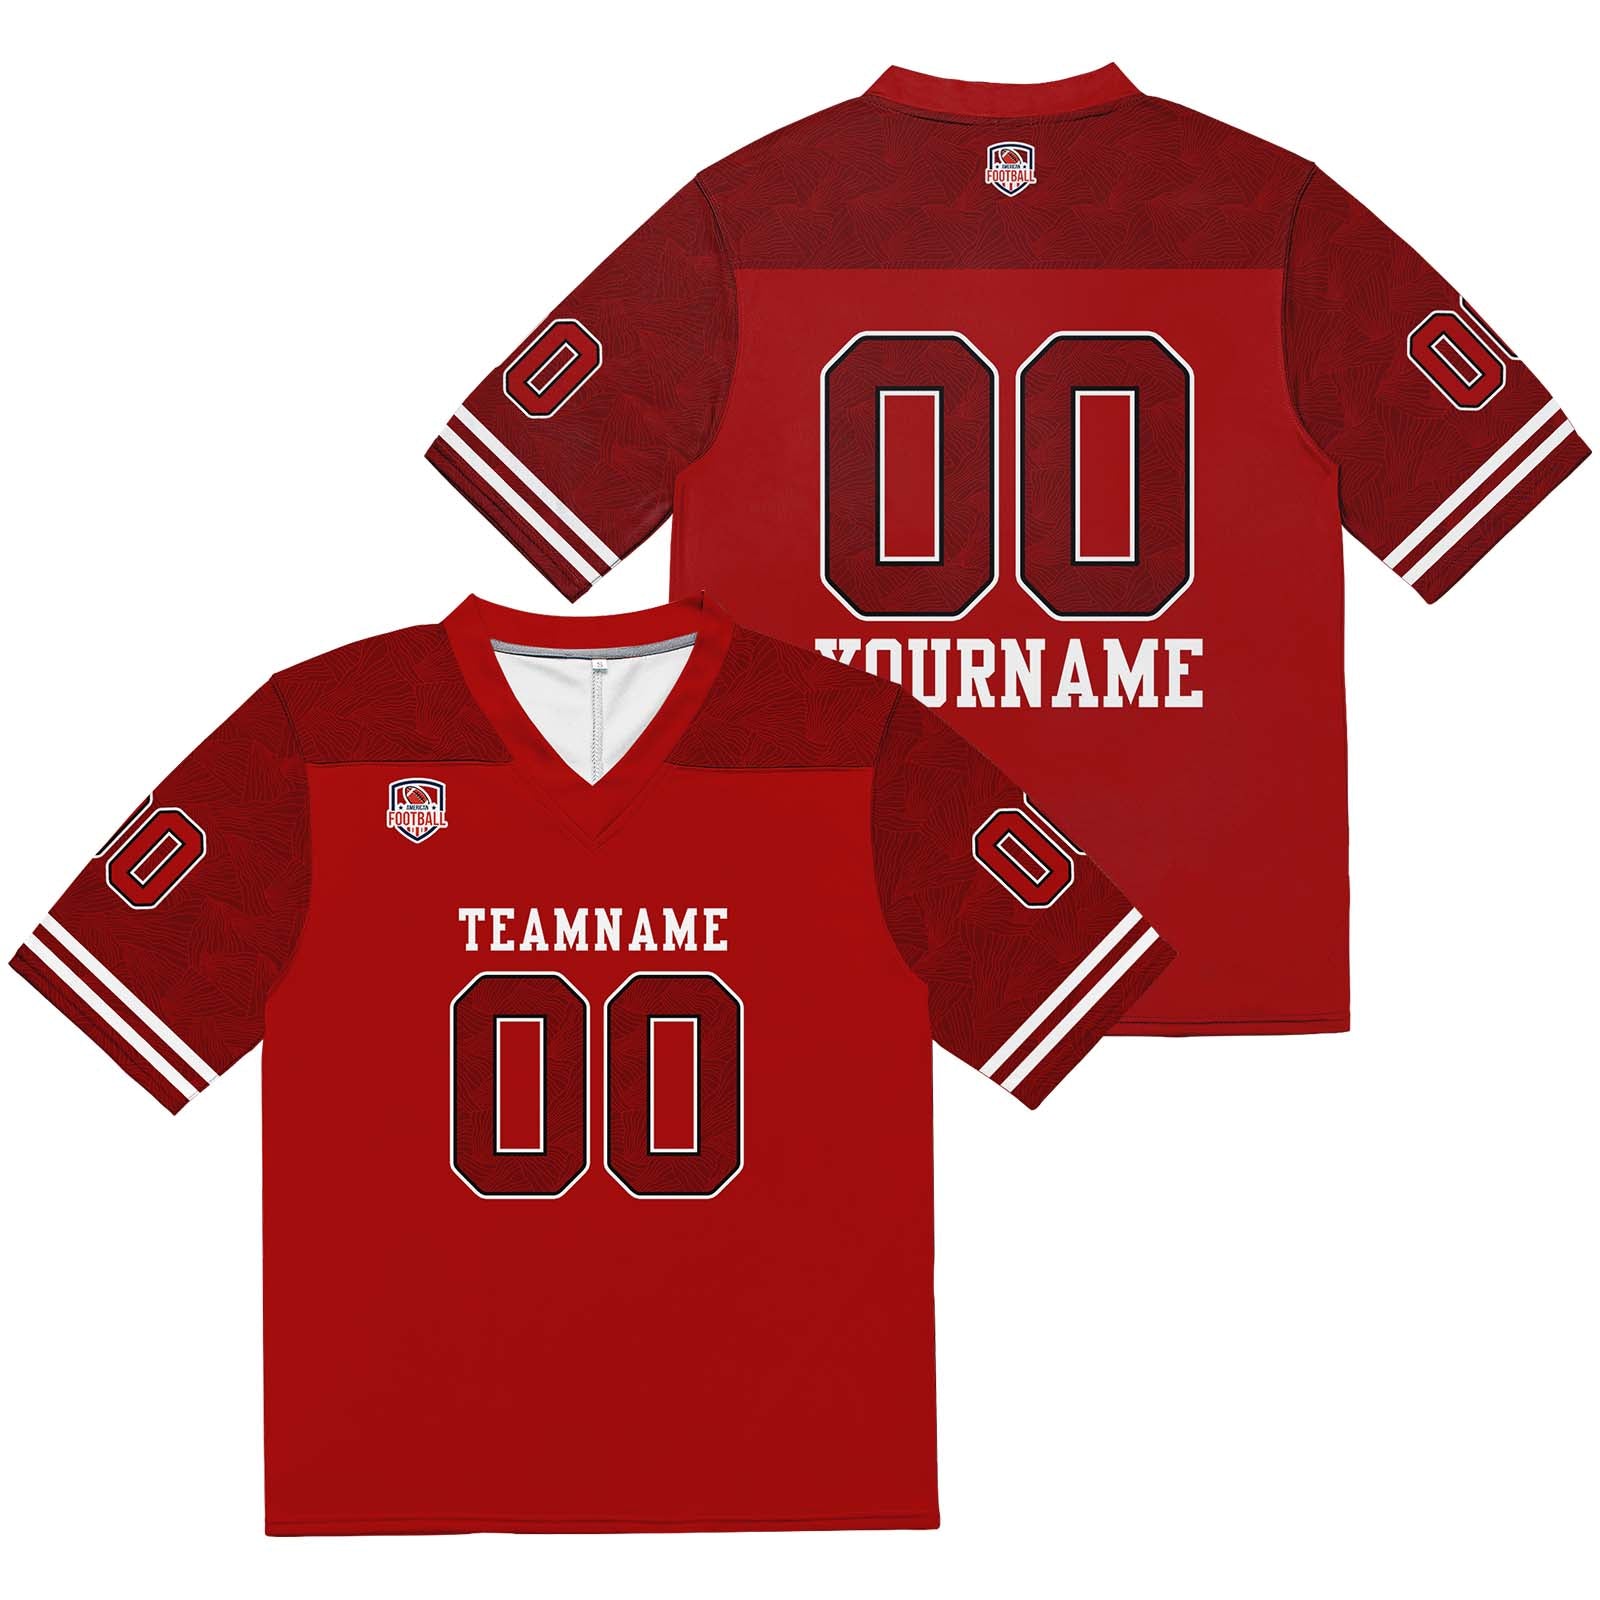 Custom Football Jersey Shirt Personalized Stitched Printed Team Name Number Red